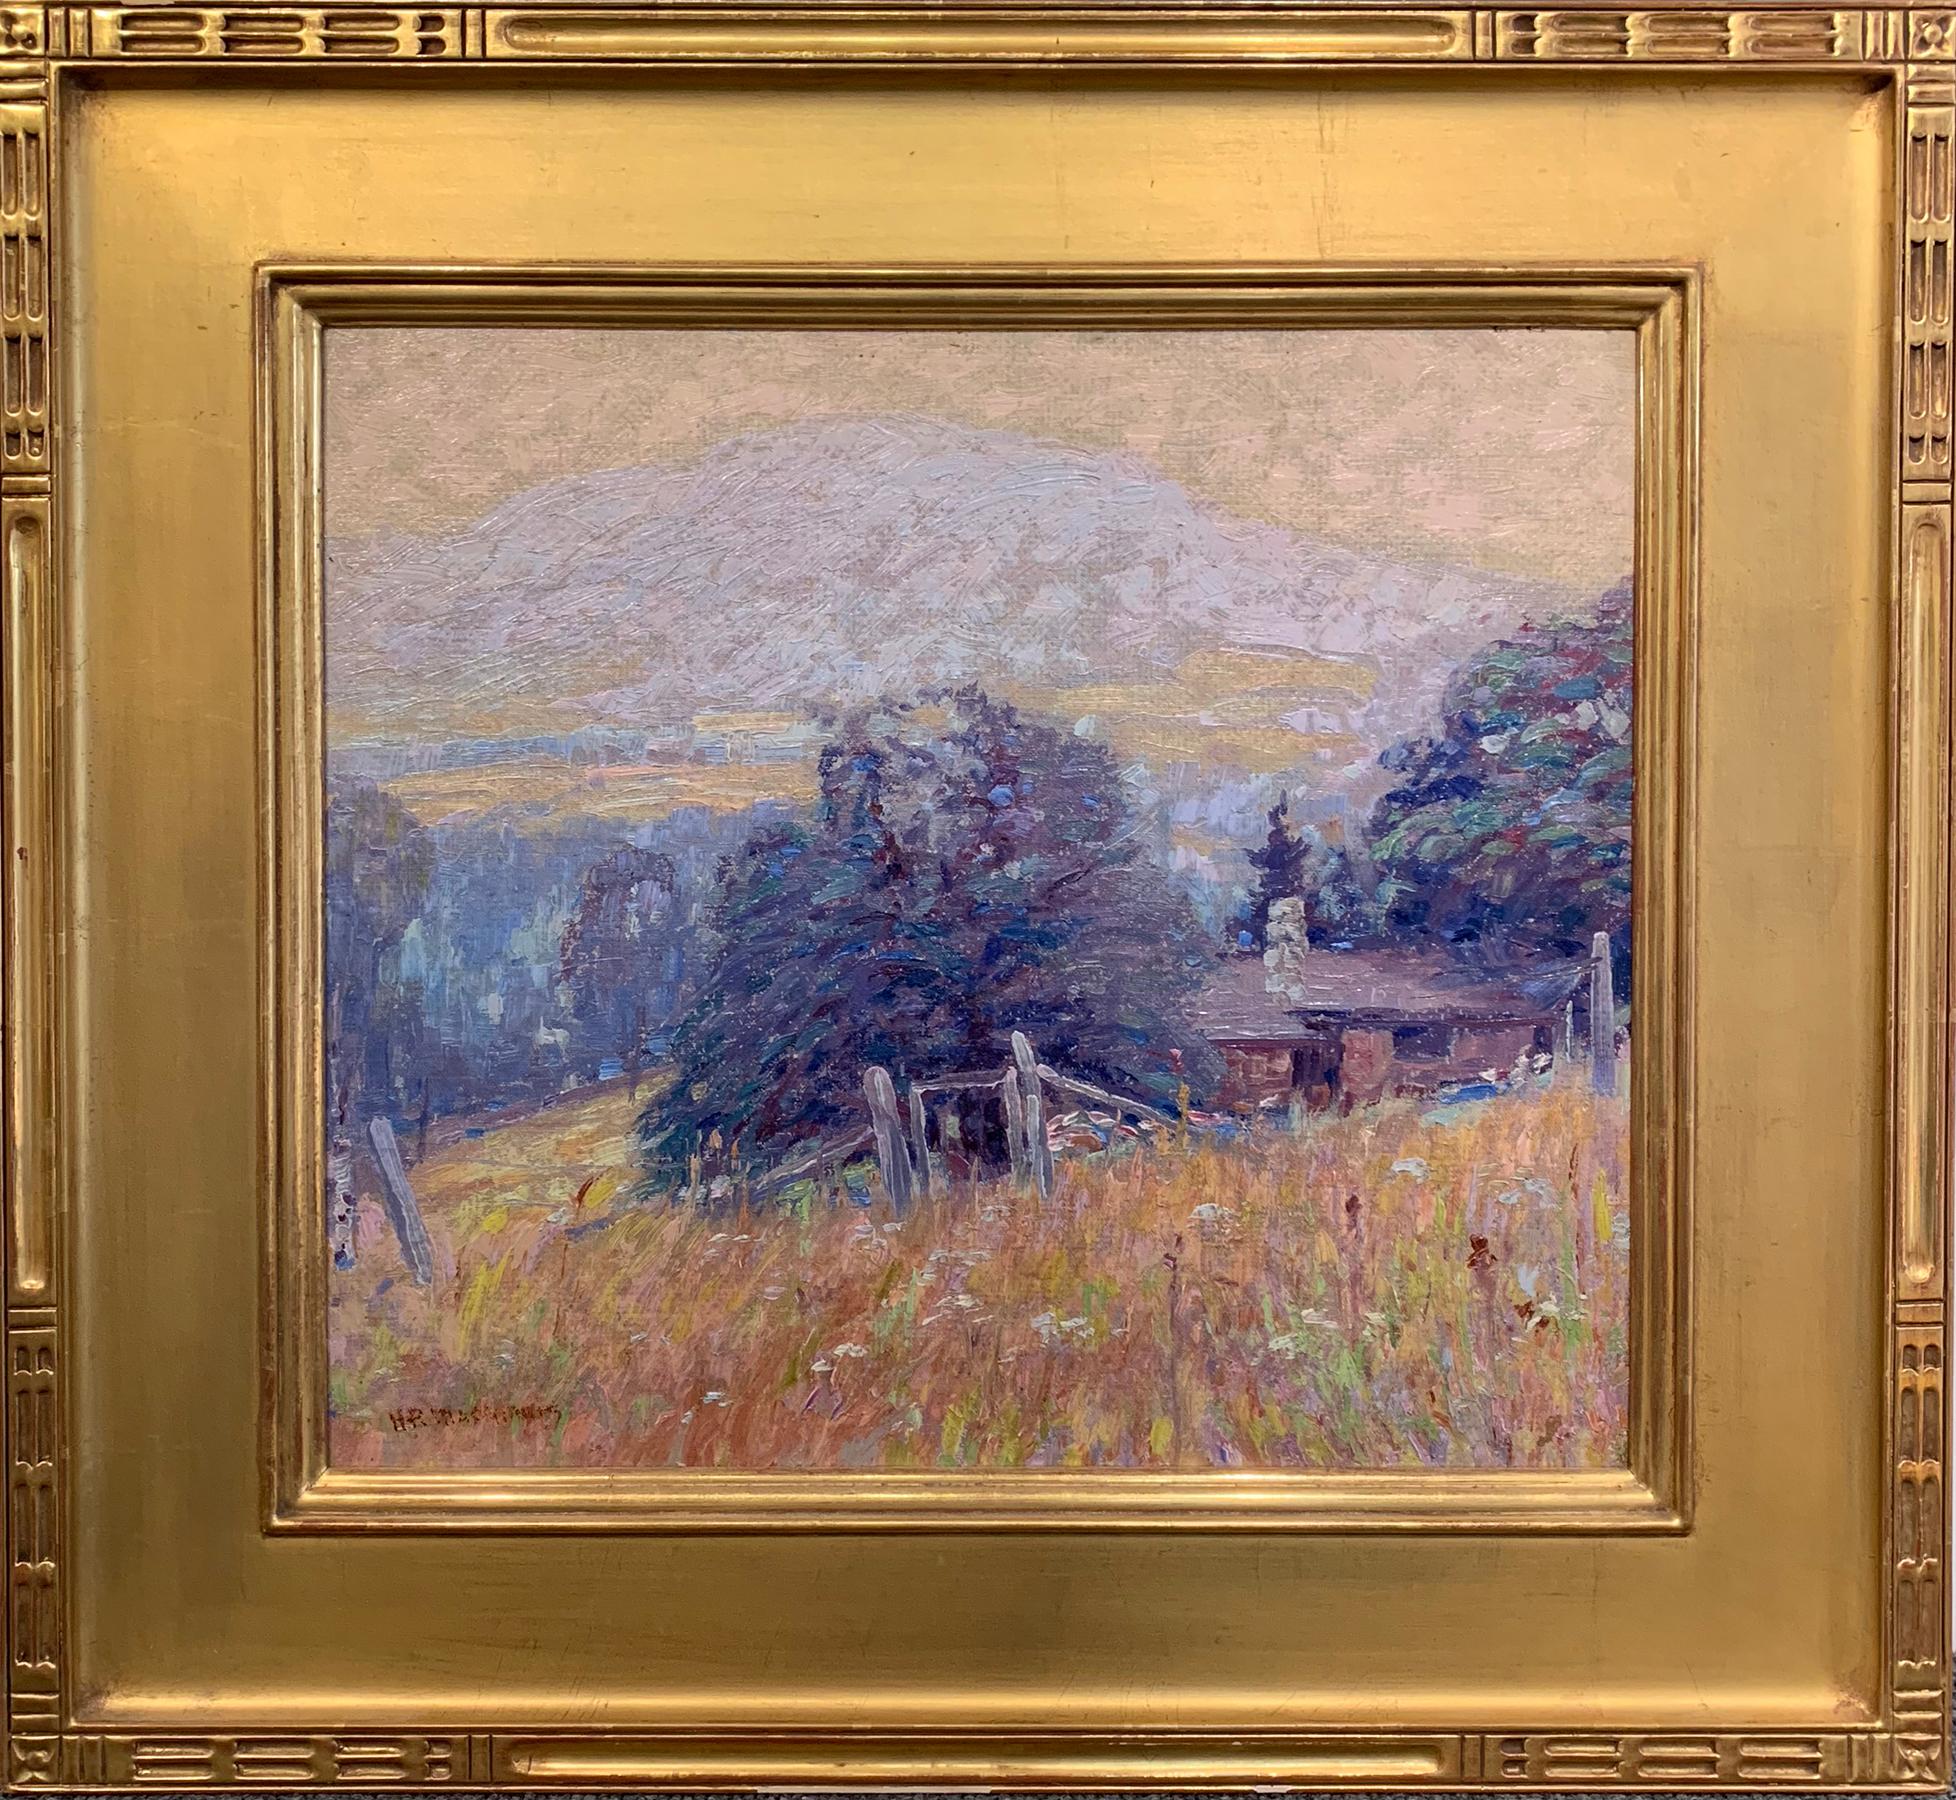 "Rocky Acres" by Henry Ryan MacGinnis is a 14" x 16" oil on masonite landscape painting. The work comes from the estate of the artist and is signed "H R MacGinnis" in the lower left. The painting is framed in a 22K gold reproduction frame.
Born in